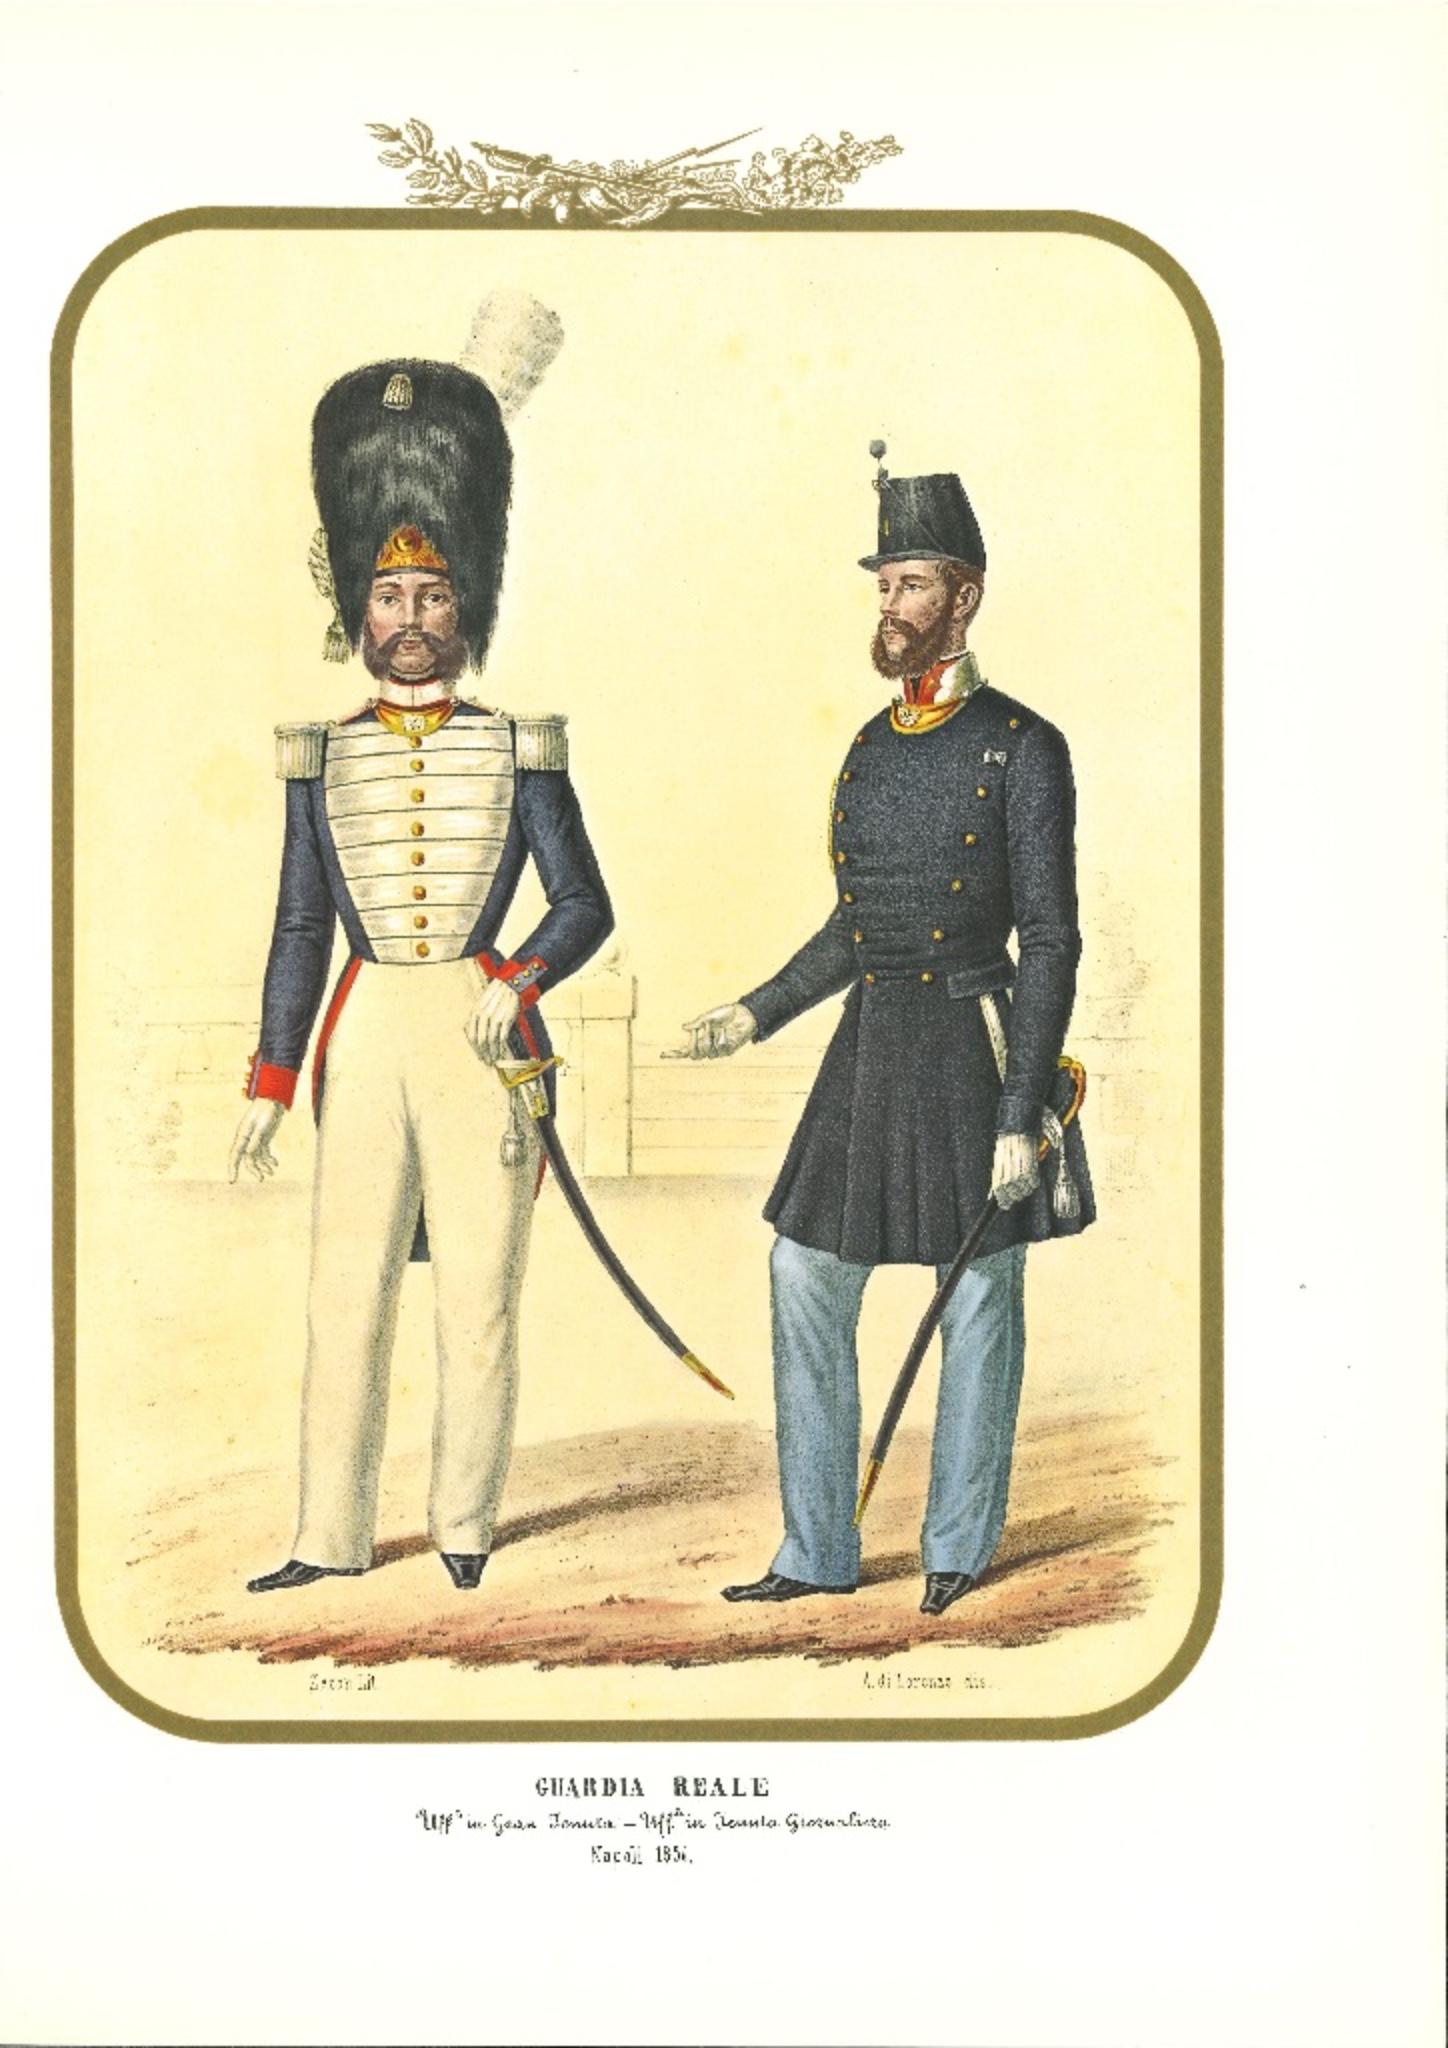 Royal Guards is an original lithograph by Antonio Zezon. Naples, 1854.

Interesting colored lithograph which describes the Royal Guards, Two Officers in dressing uniform.

In excellent condition, it belongs to one of the most famous lithographic